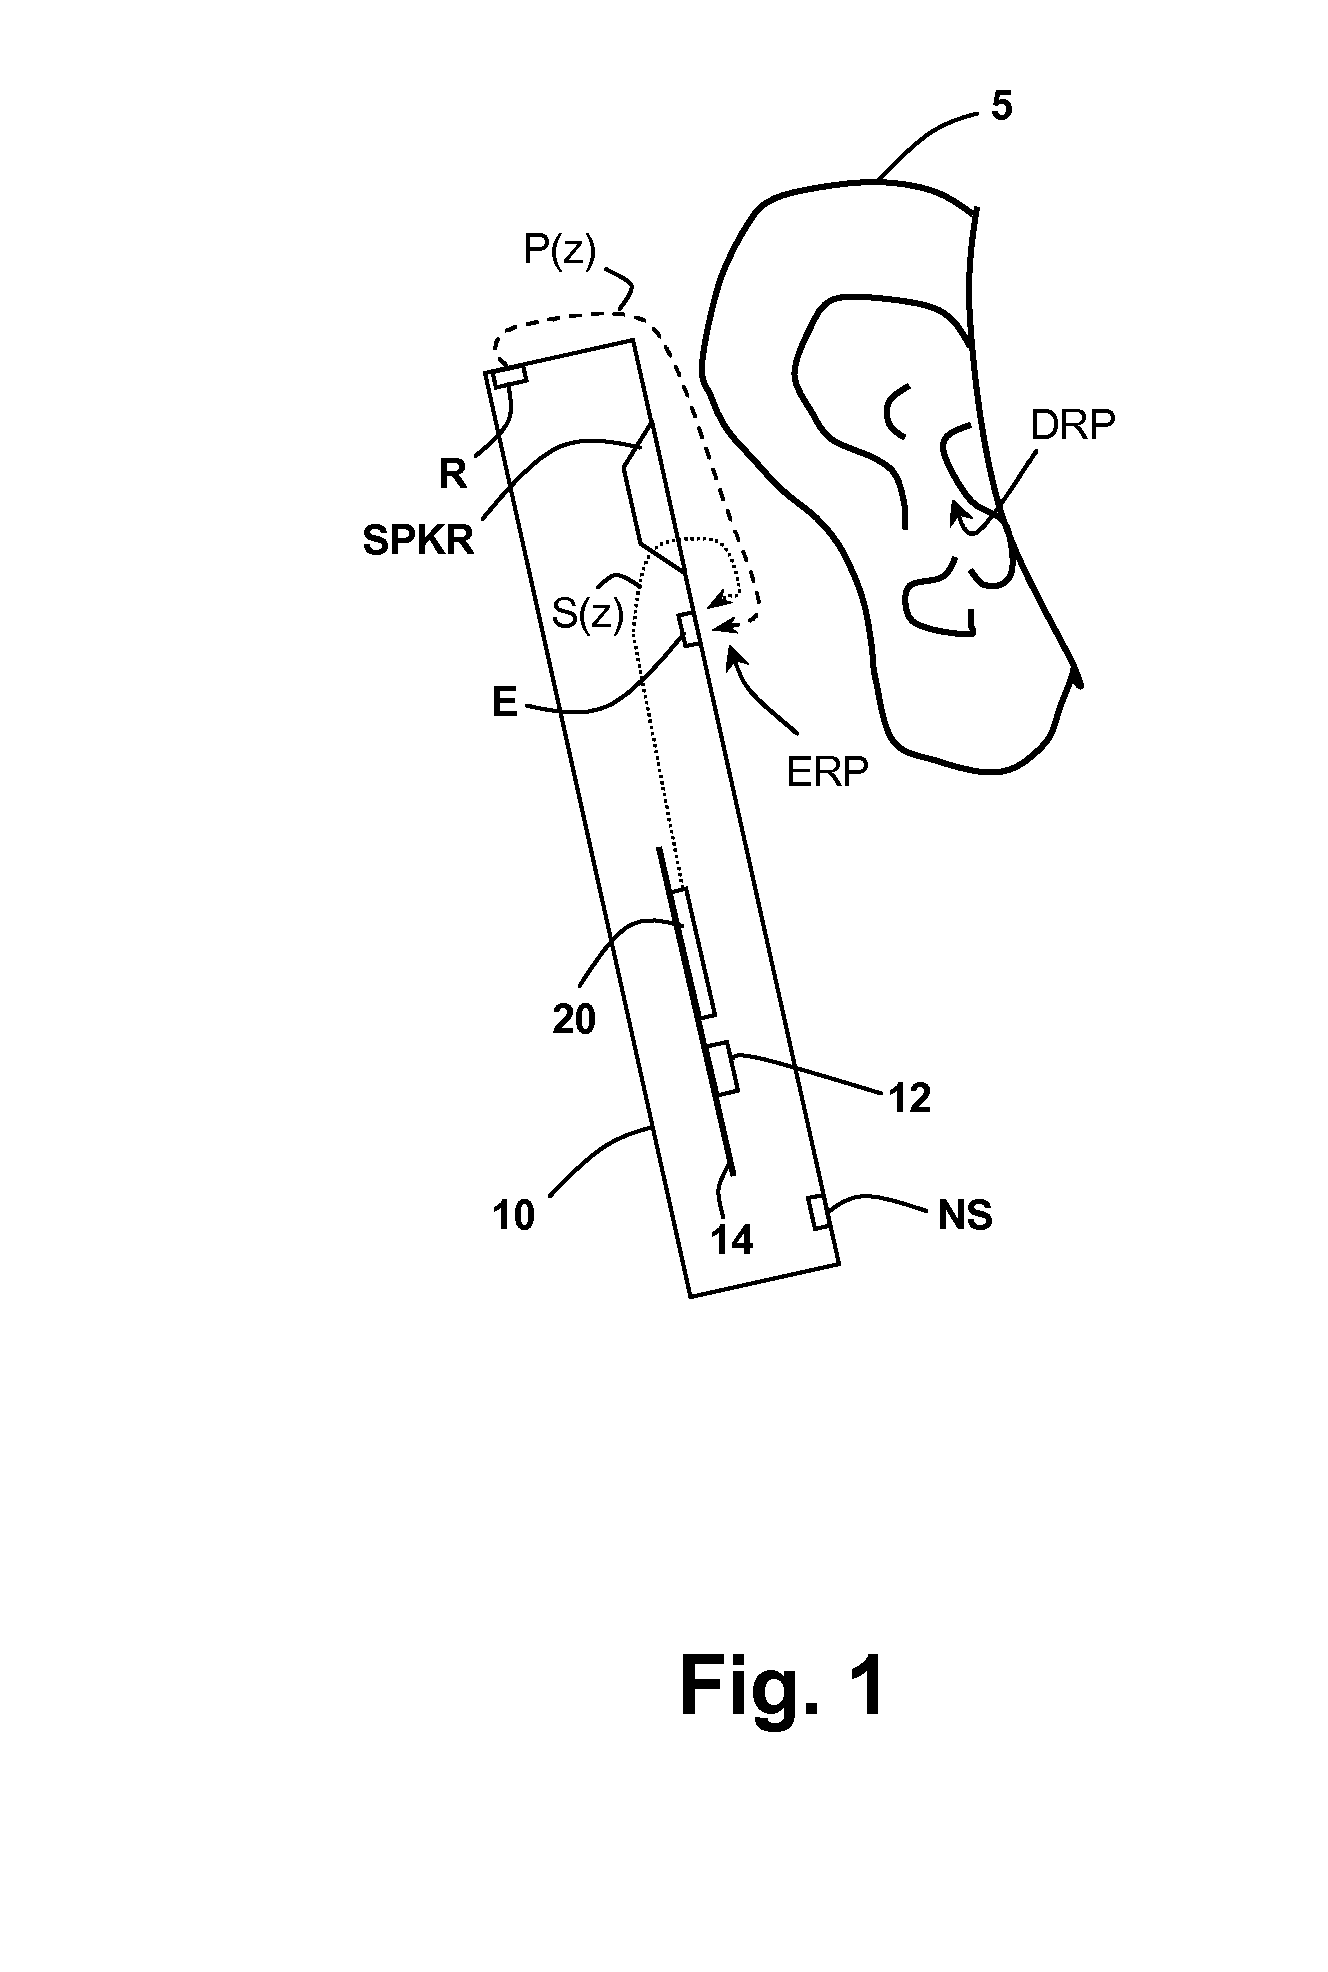 Bandlimiting Anti-noise in personal audio devices having adaptive noise cancellation (ANC)